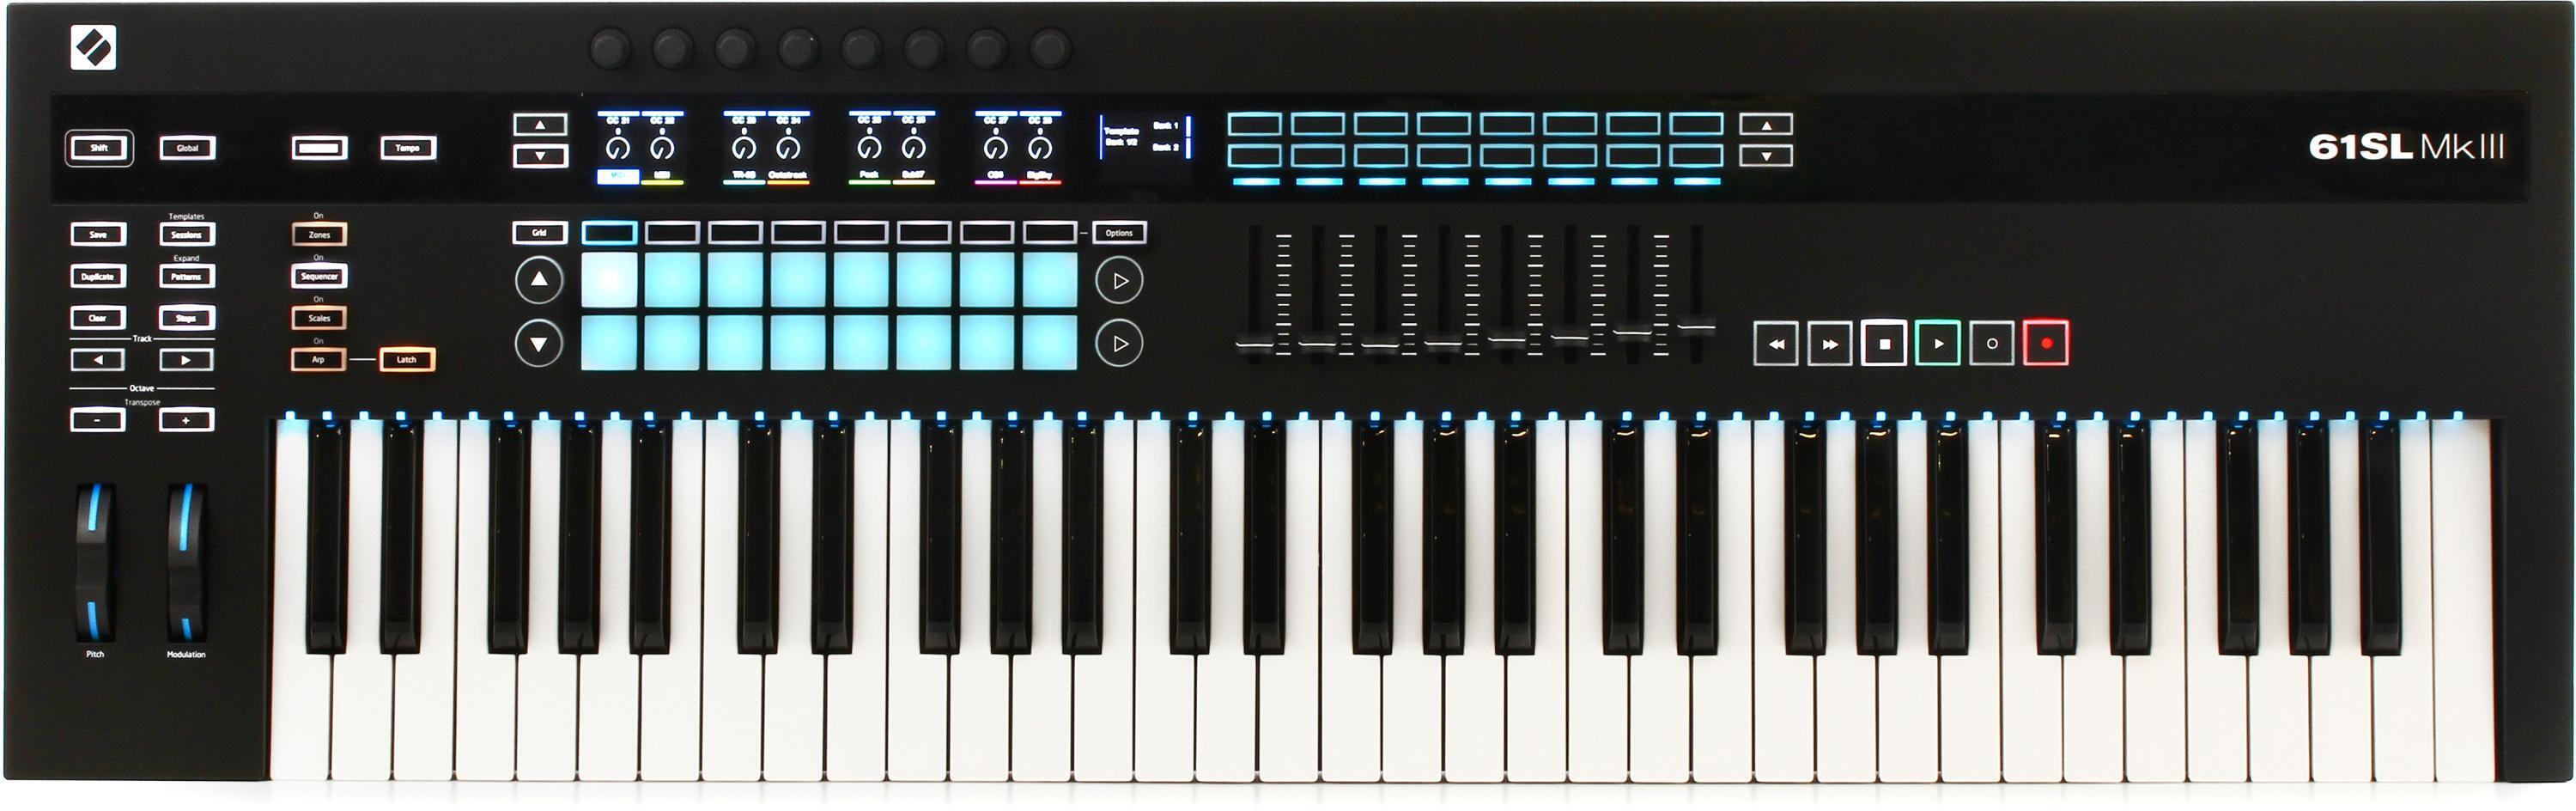 Novation 61SL MkIII 61-key Keyboard Controller with Sequencer